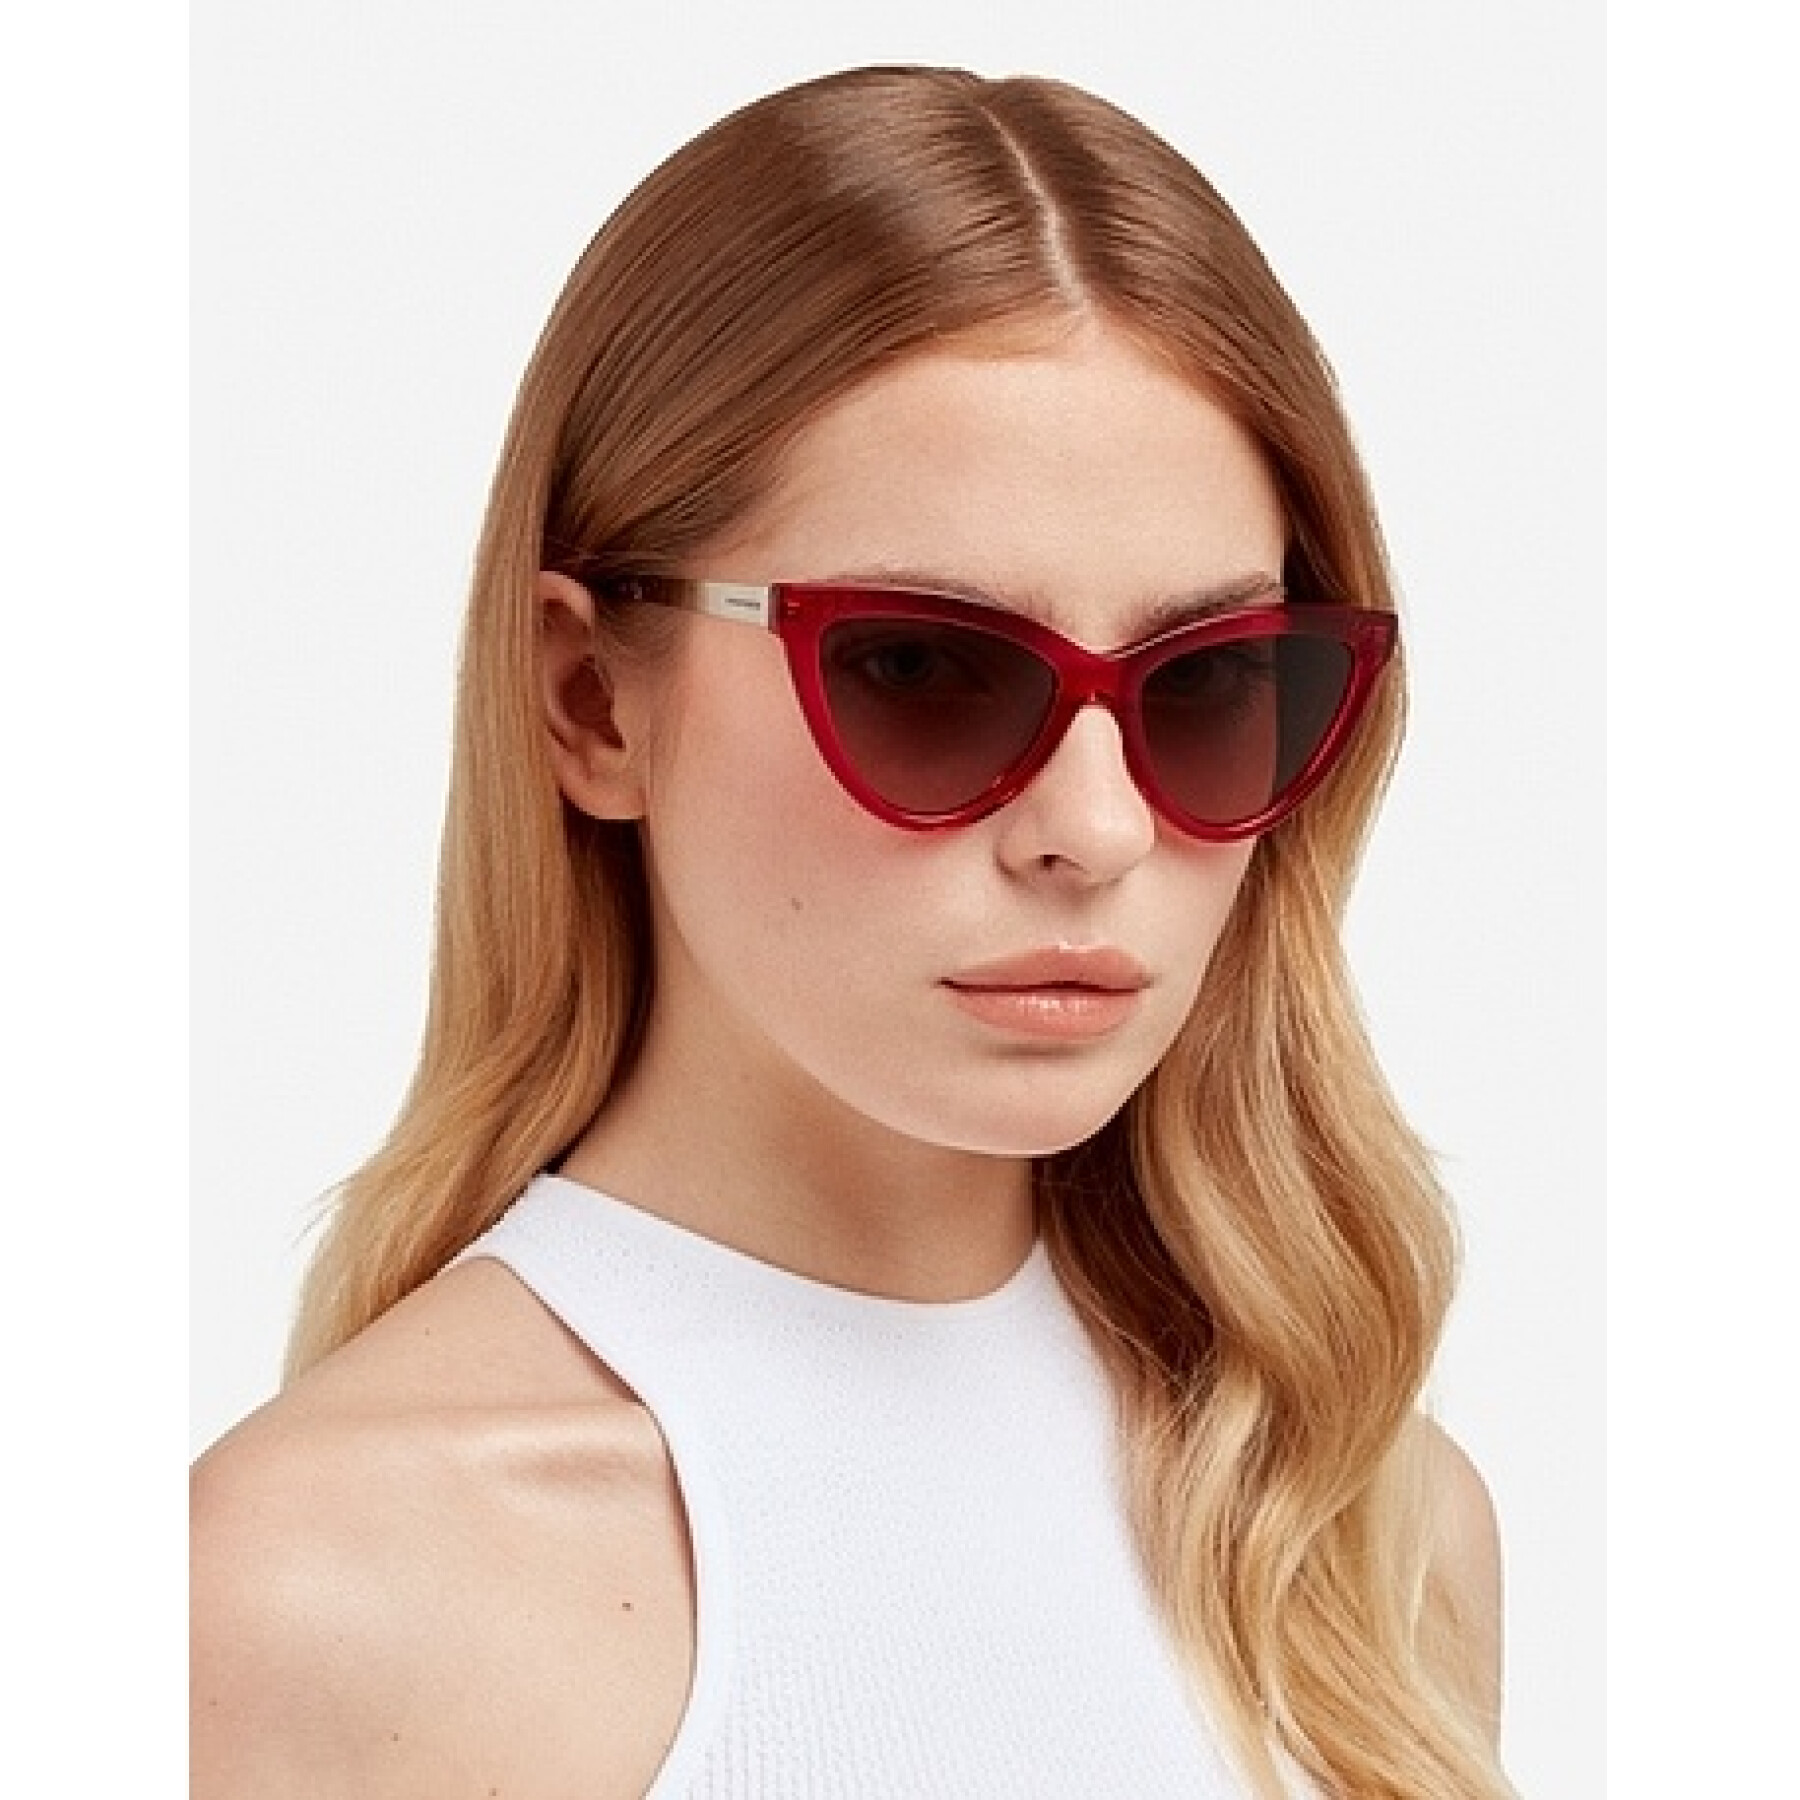 Lunettes de soleil Hawkers Cosmo